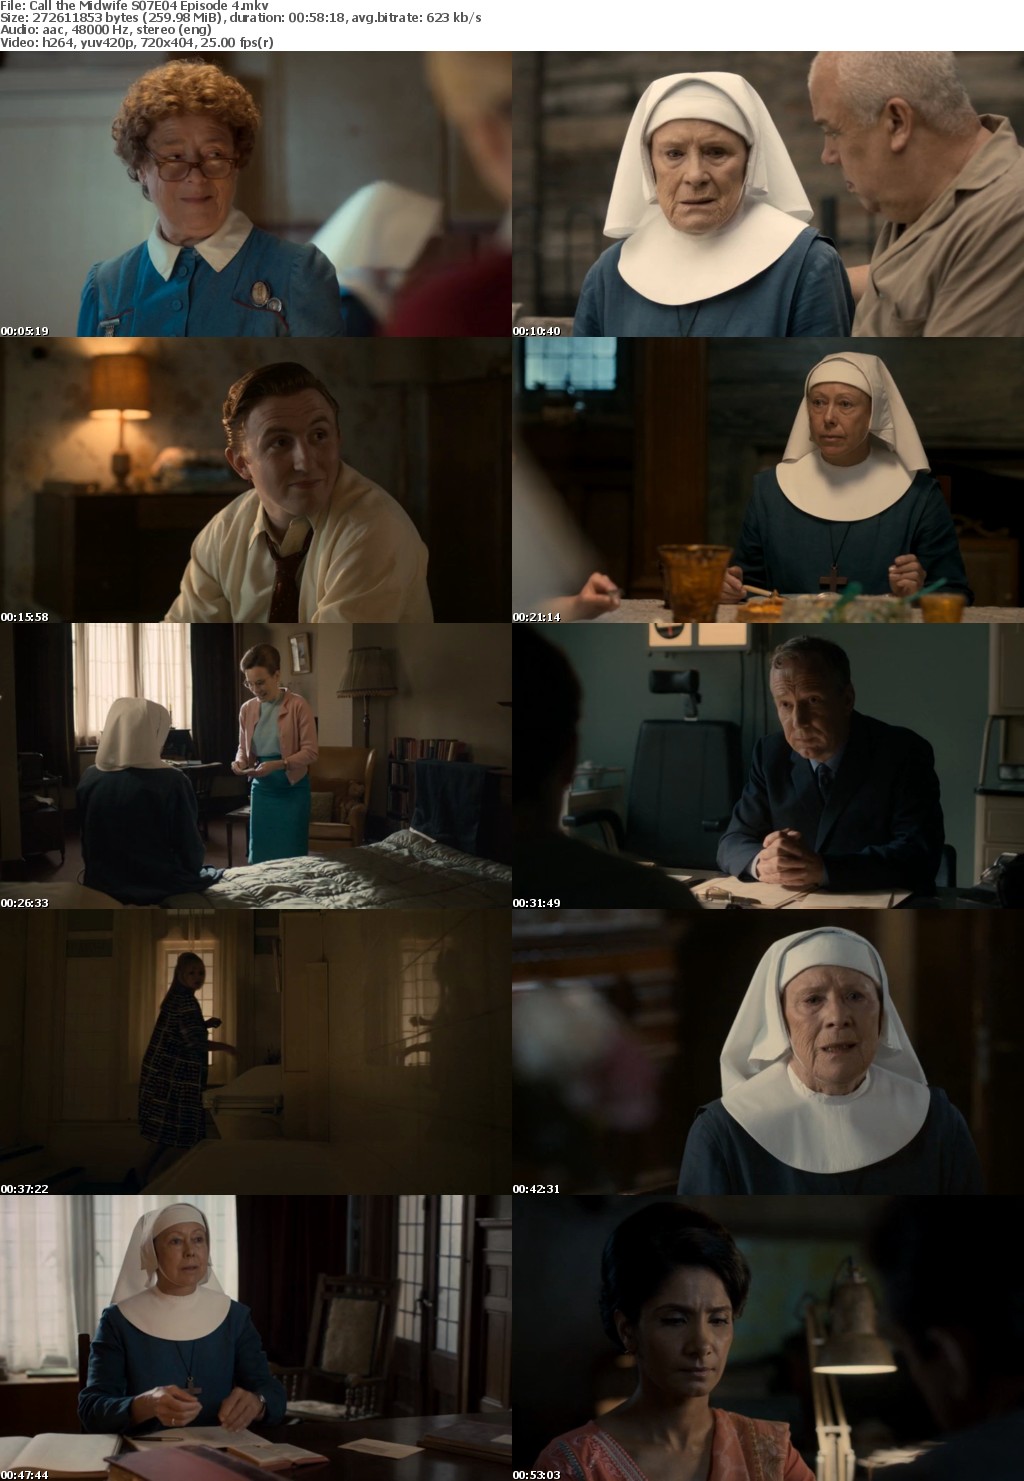 Call the Midwife 2012 Season 7 Complete TVRip x264 i c